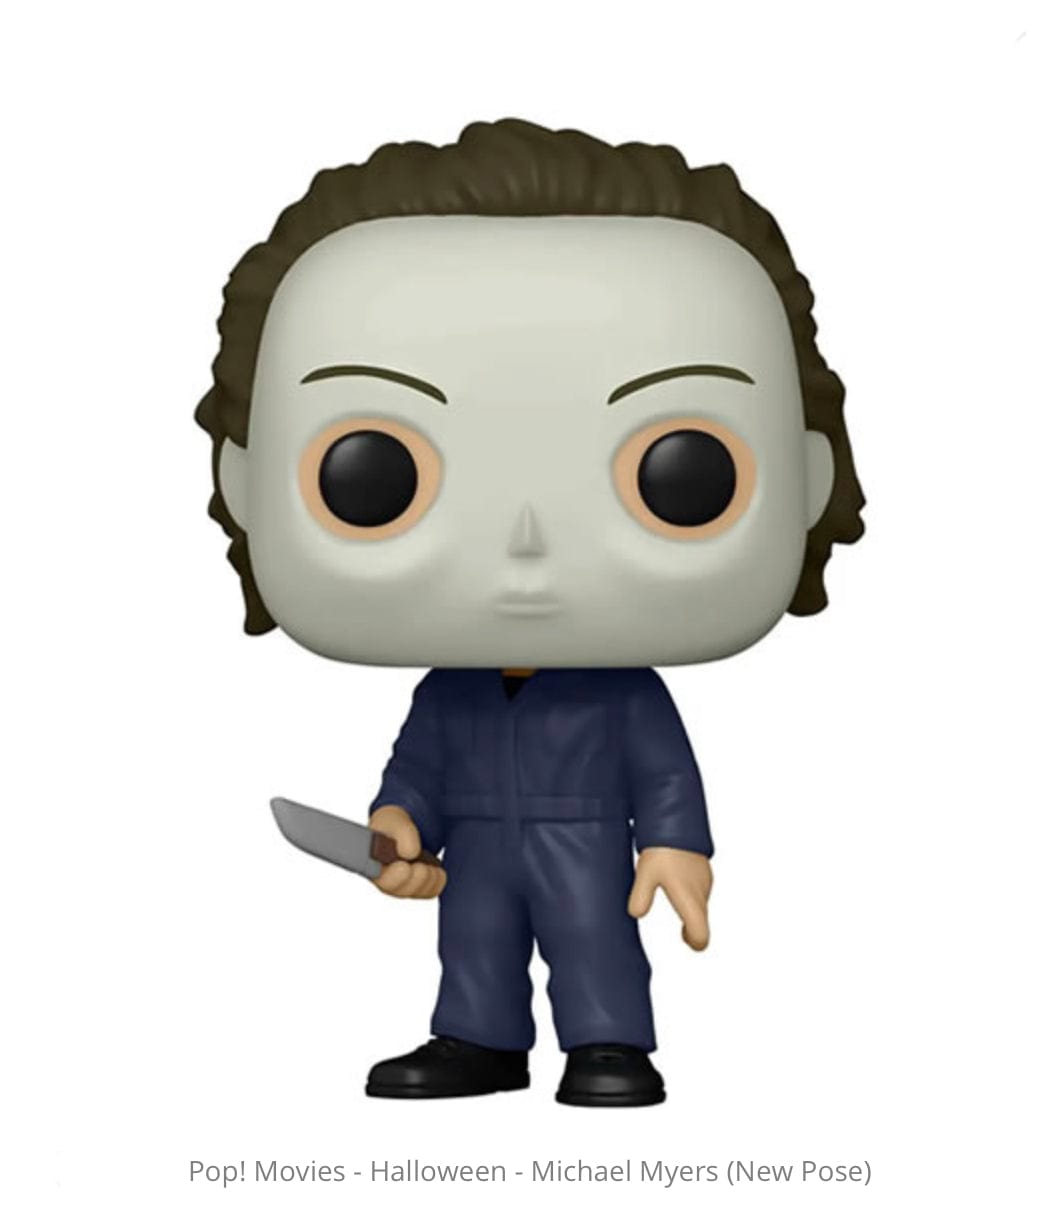 Funko Pop! Movies - Halloween - Michael Myers (New Pose) Title and image